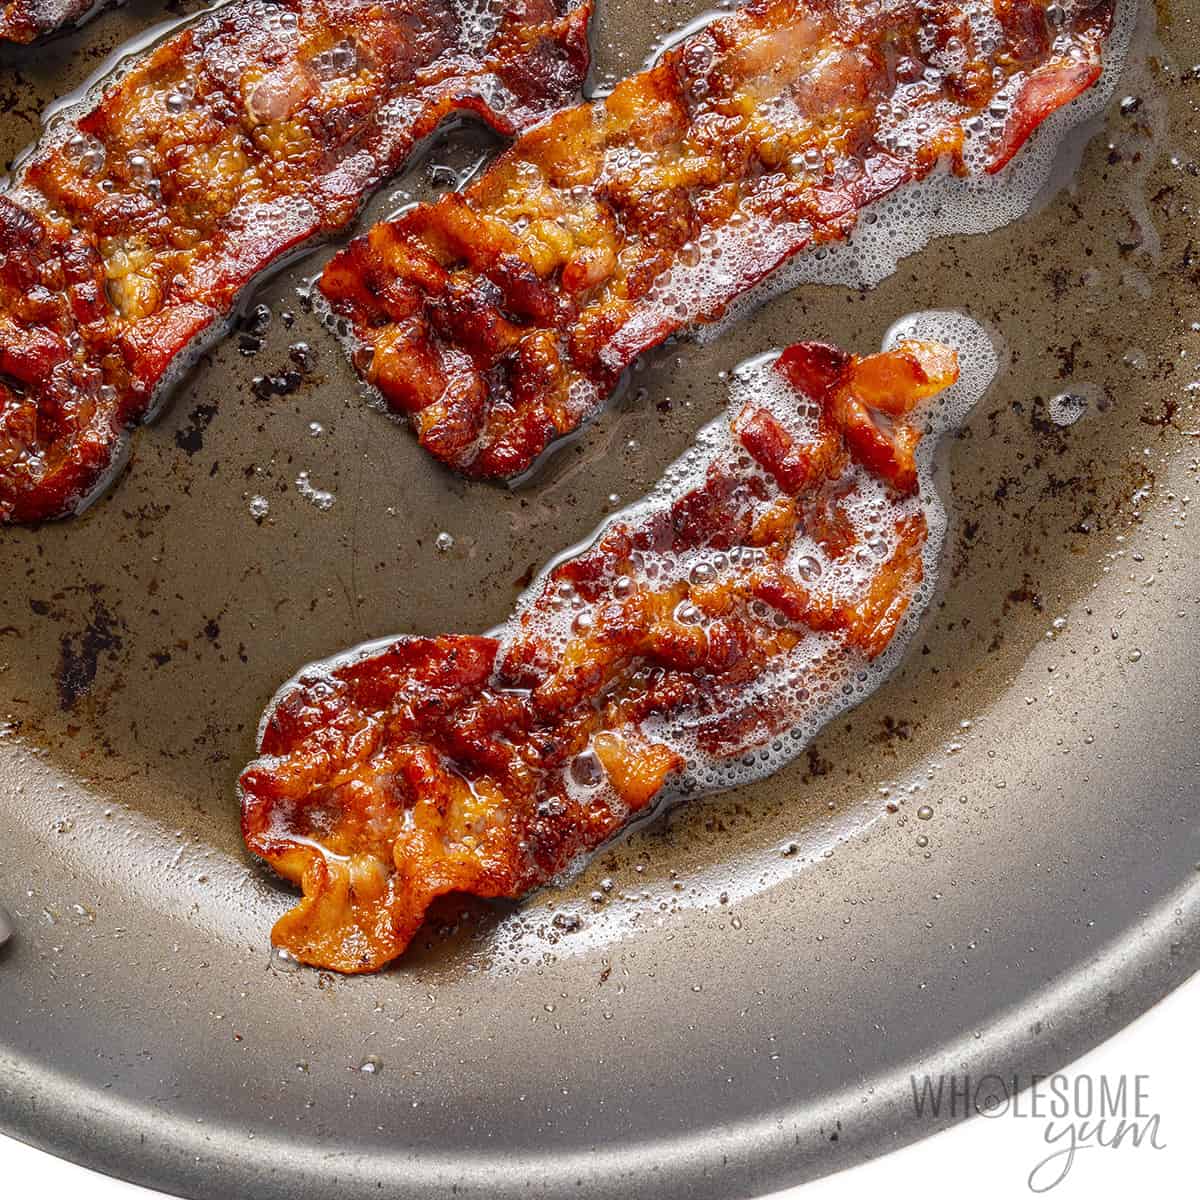 Bacon cooking in a pan.